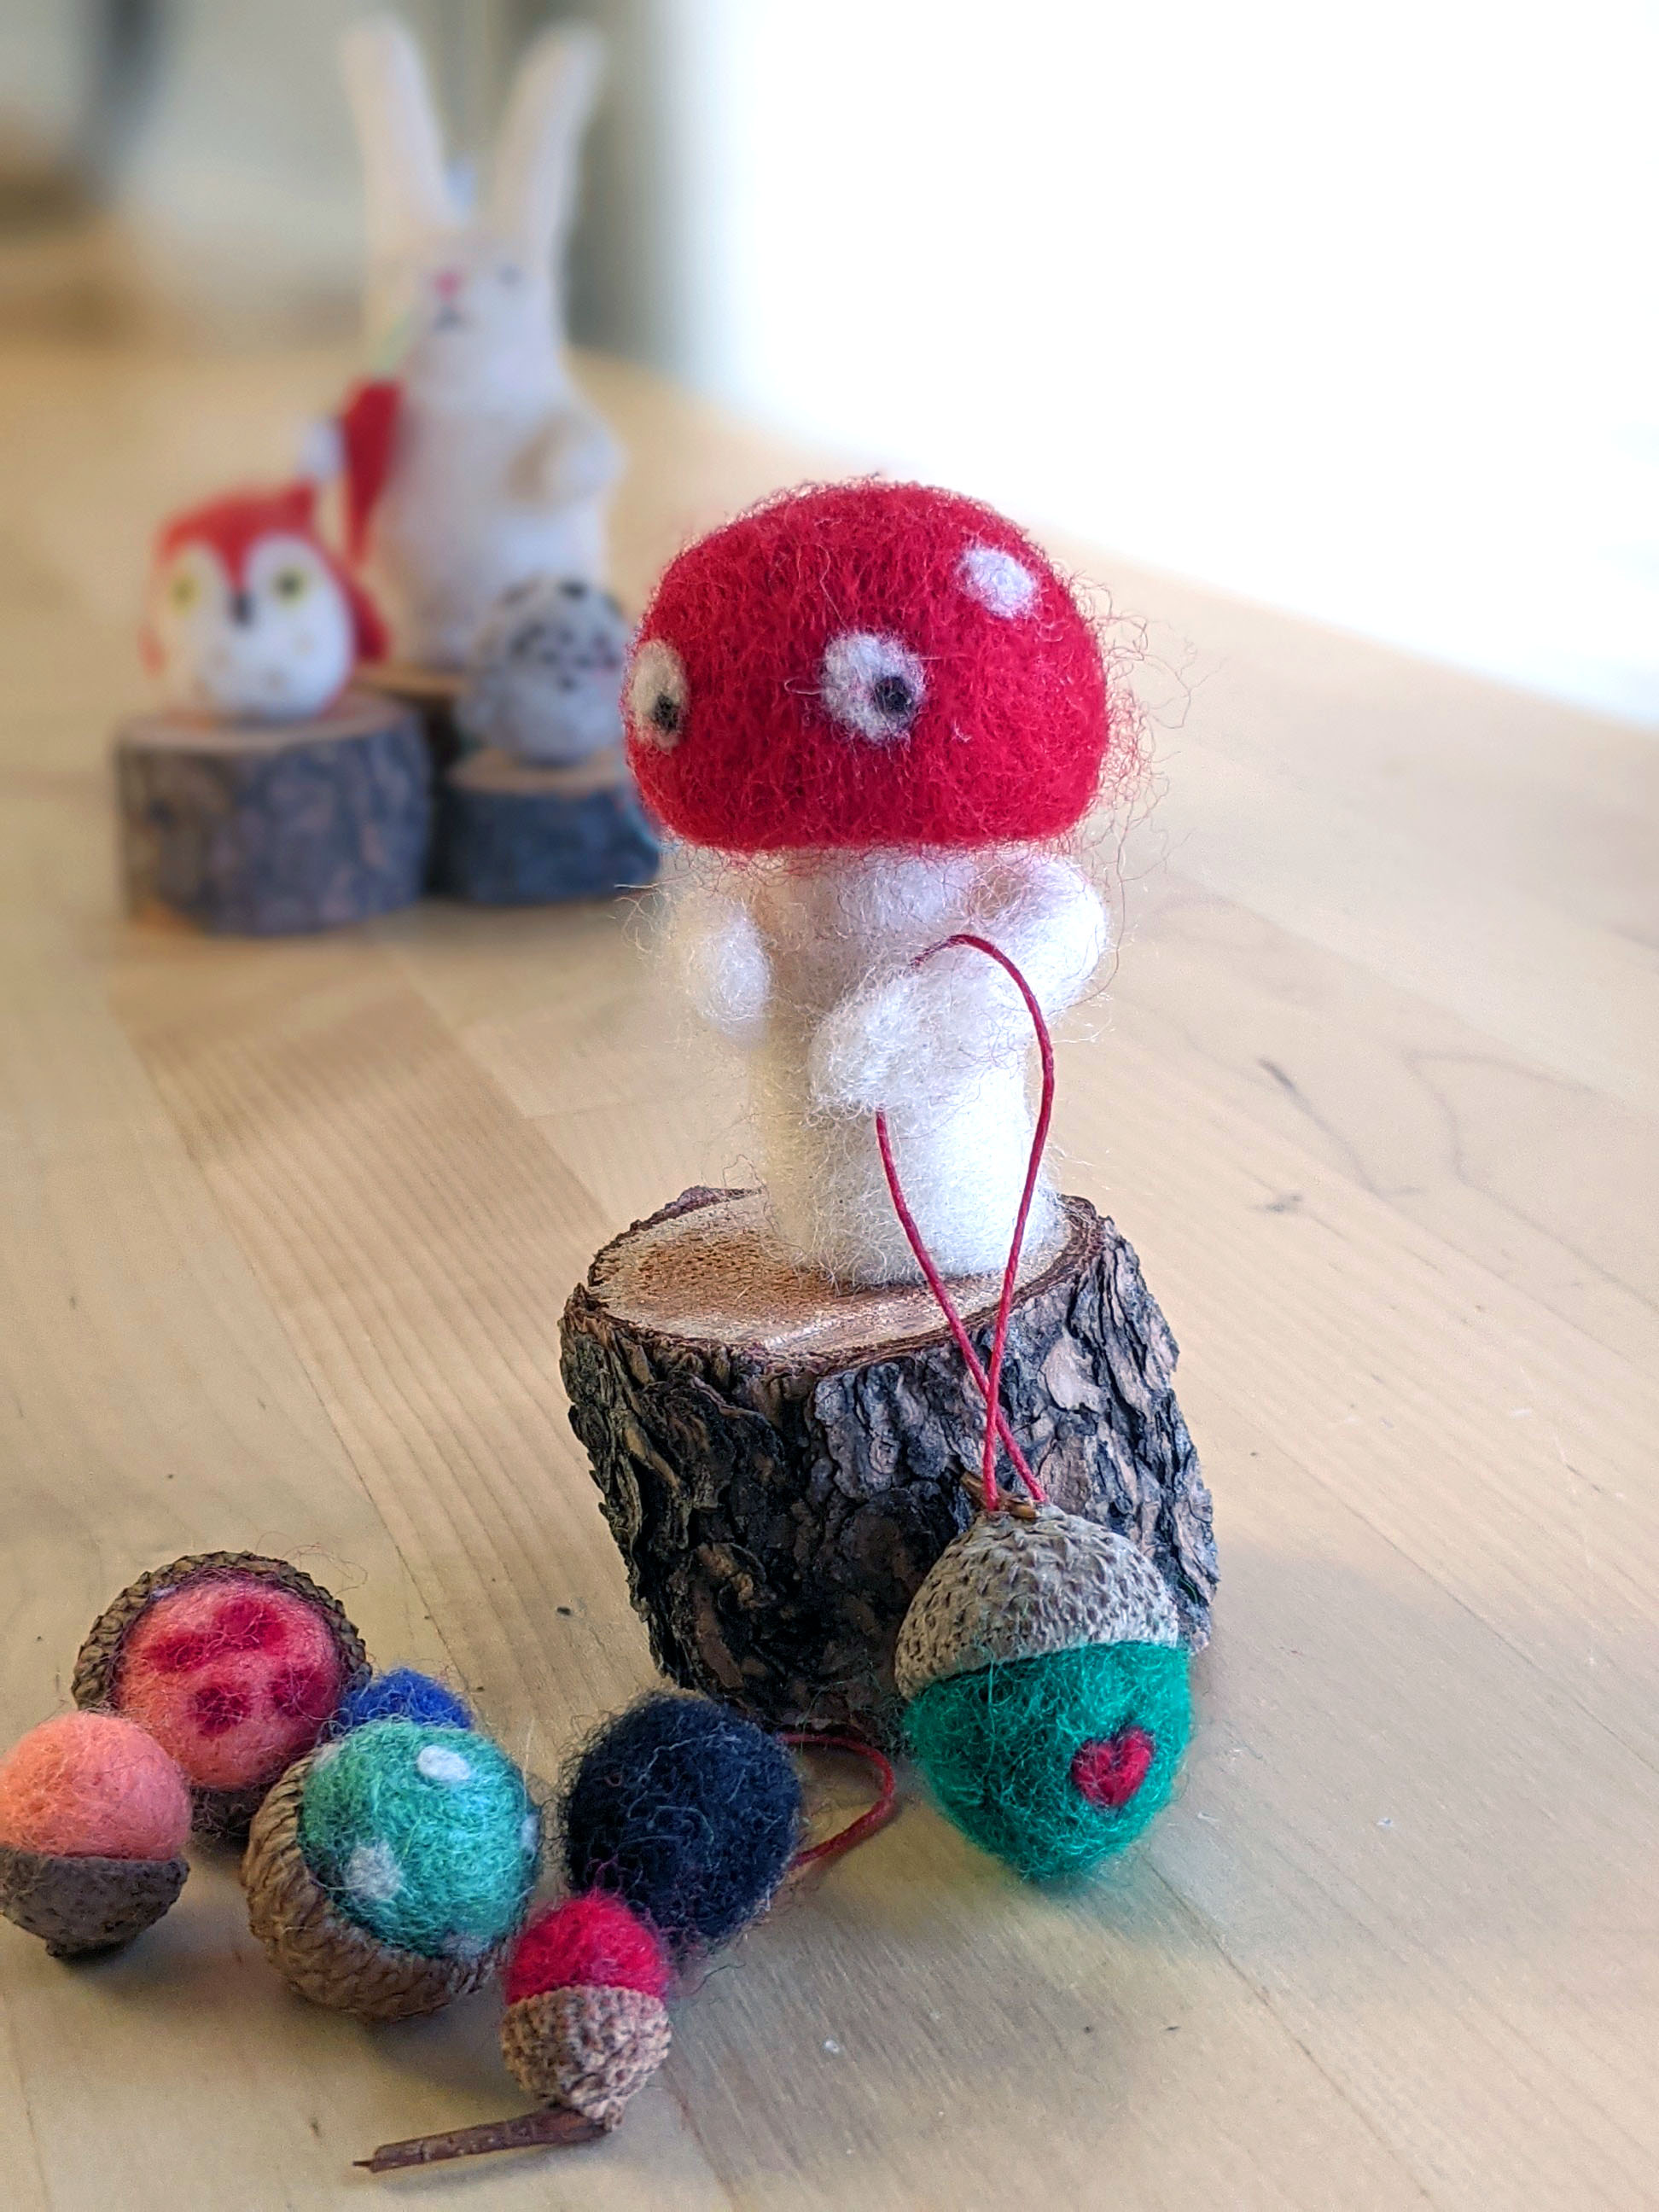 Needlefelting mushroom and acorns on a piece of wood with needlefelted bunny in the background